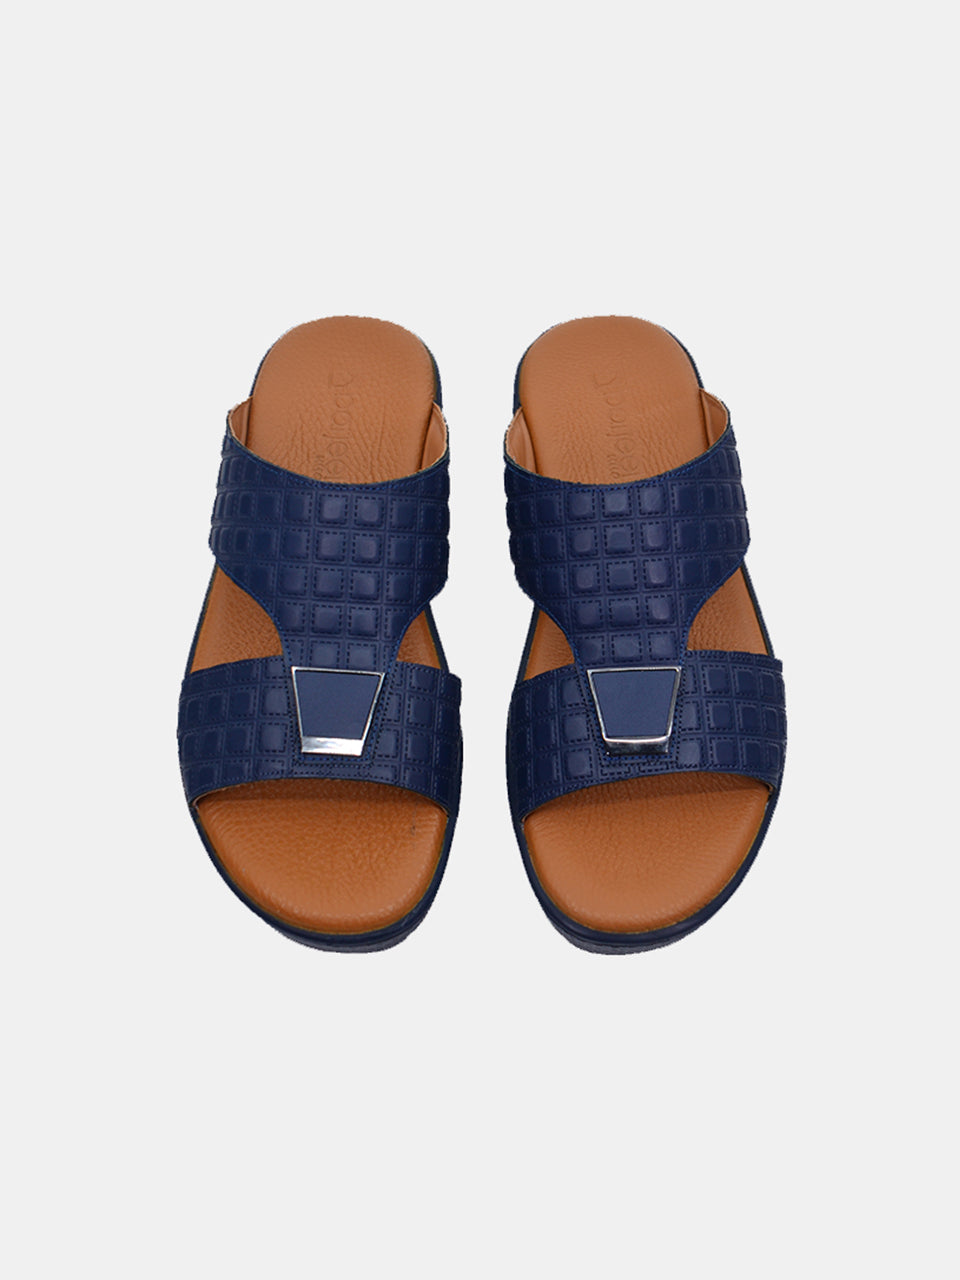 Buy Arabic Sandals from these stores in Qatar | Qatar Living